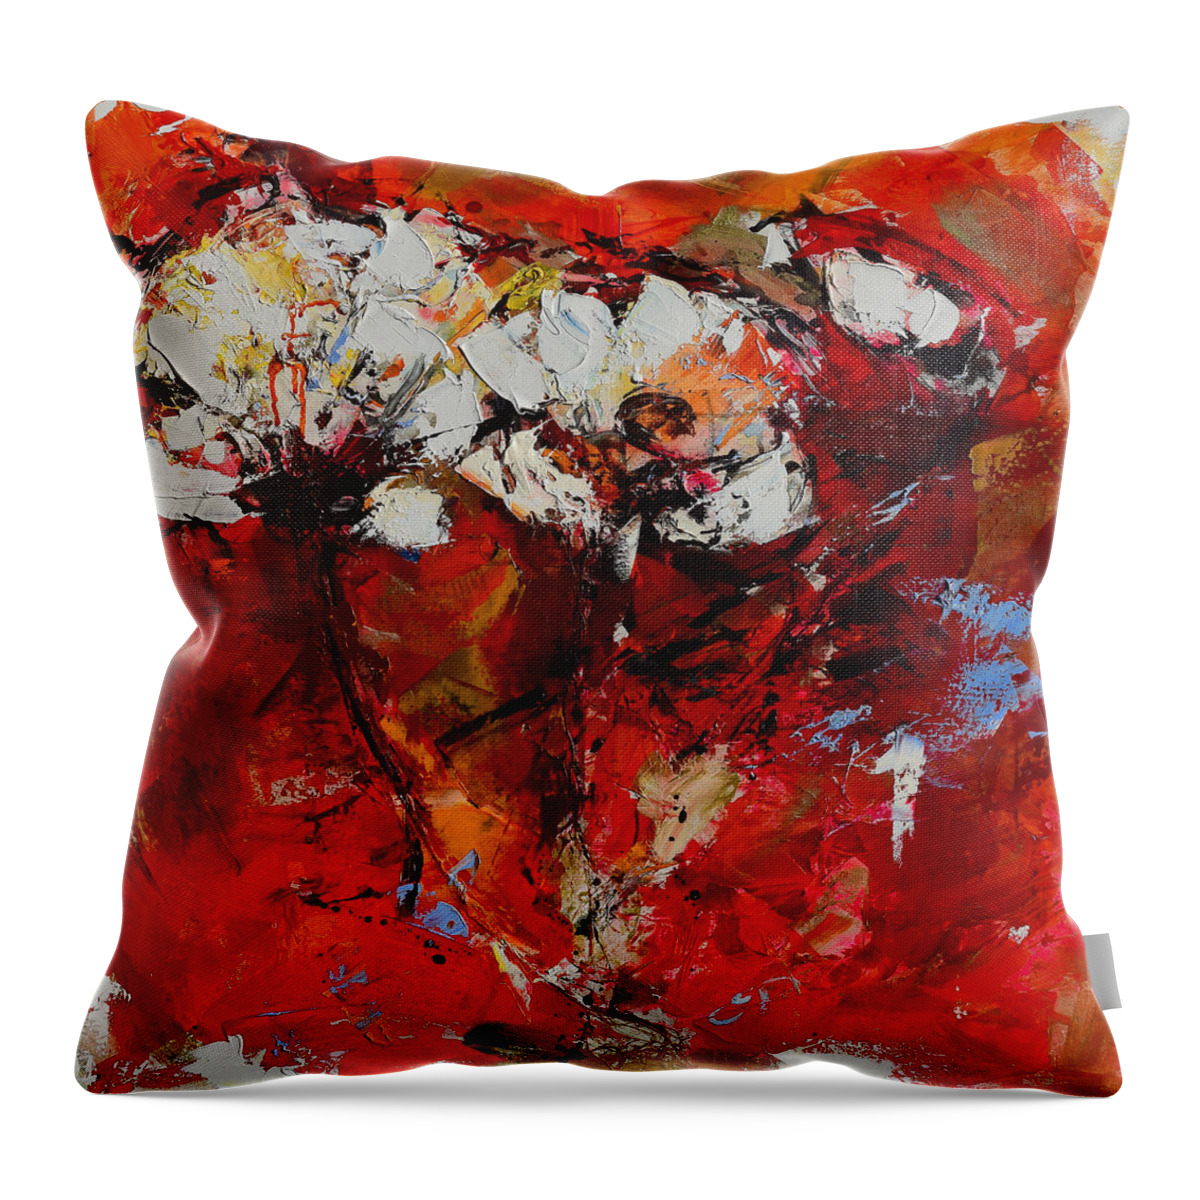 Flowers Throw Pillow featuring the painting Dancing Flowers by Elise Palmigiani